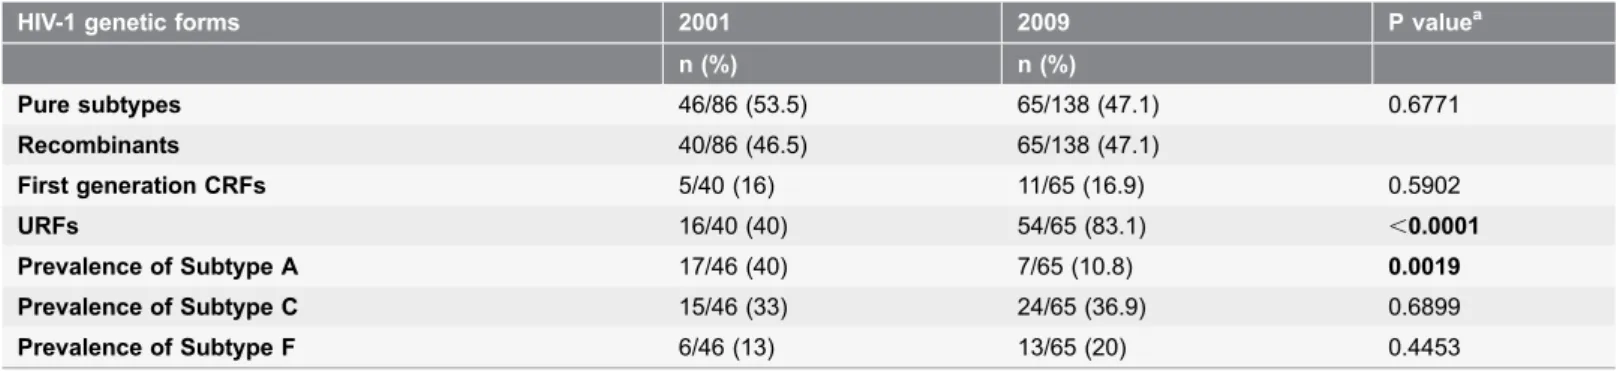 Table 2. Evolution of HIV-1 genetic diversity in Luanda from 2001 to 2009.